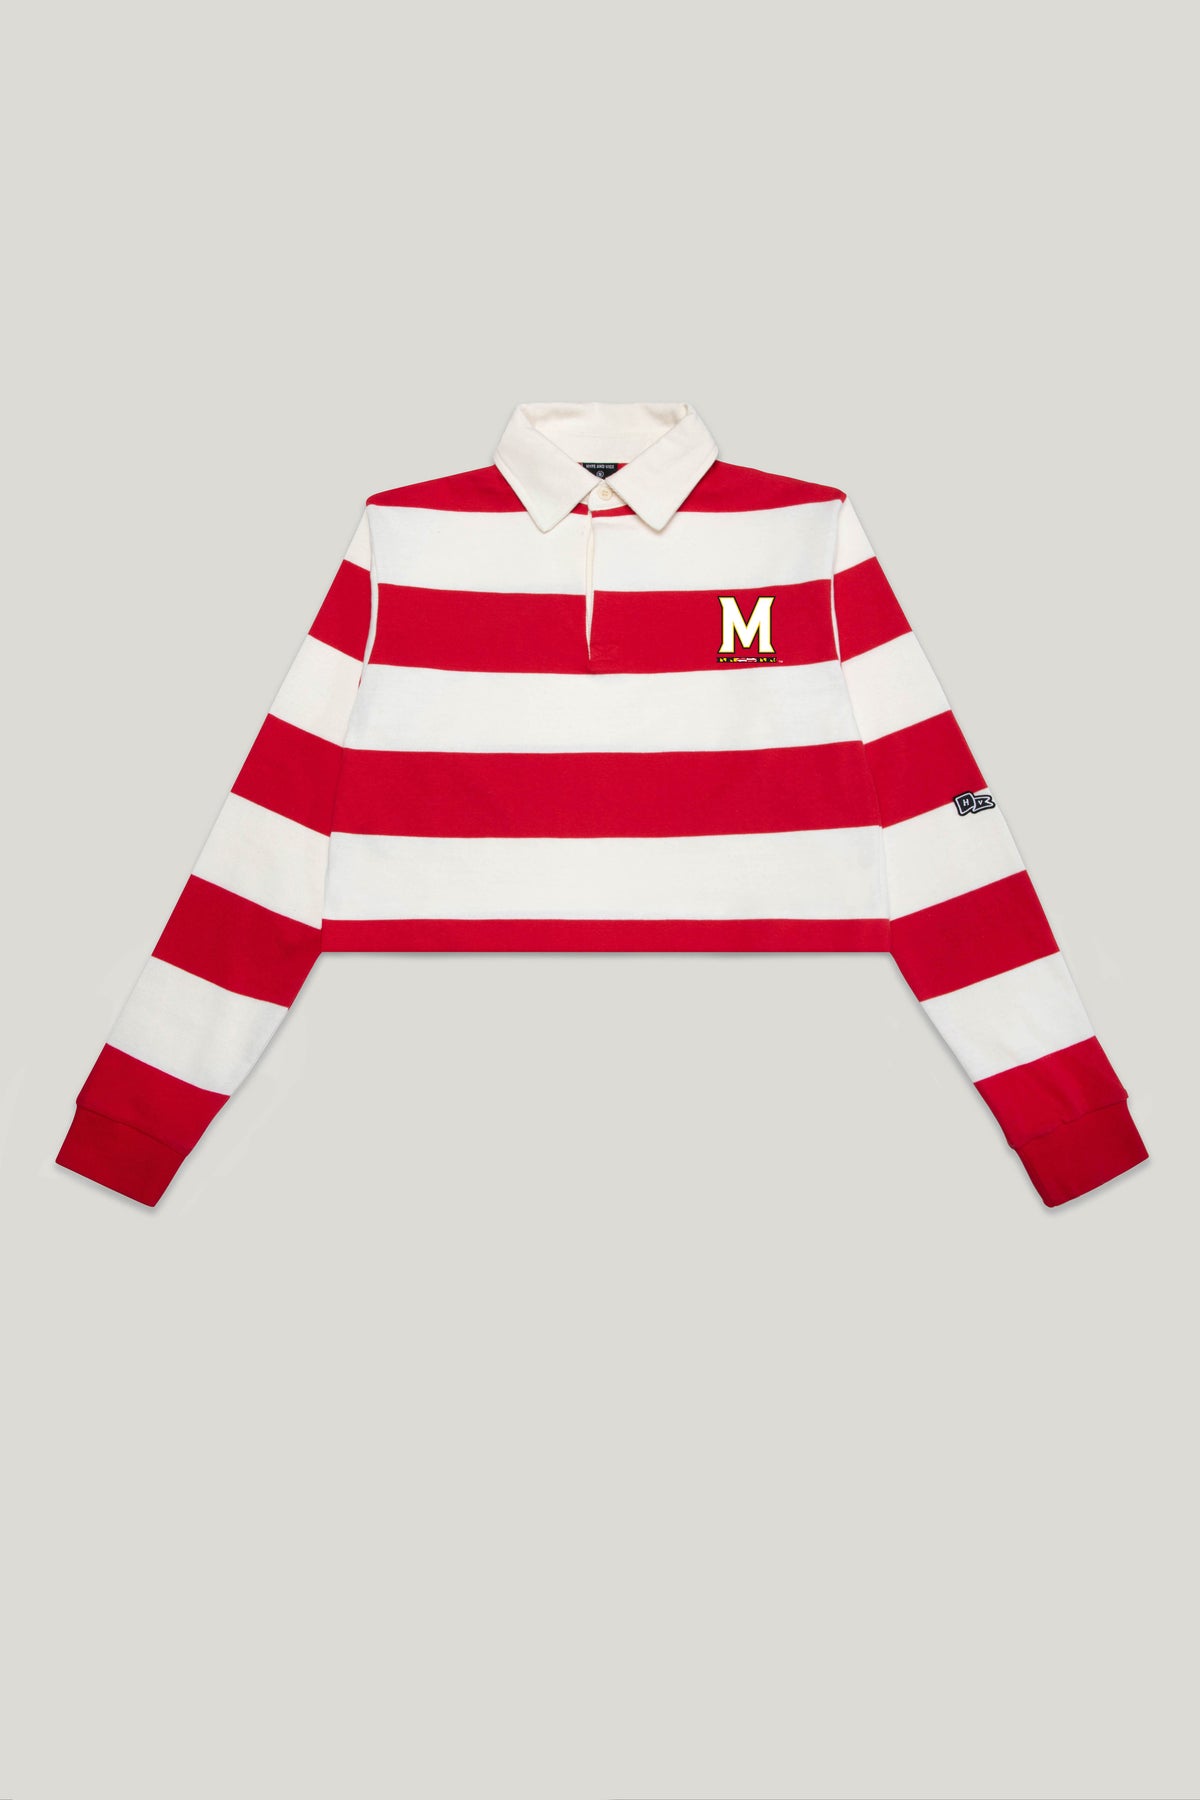 Maryland Rugby Top